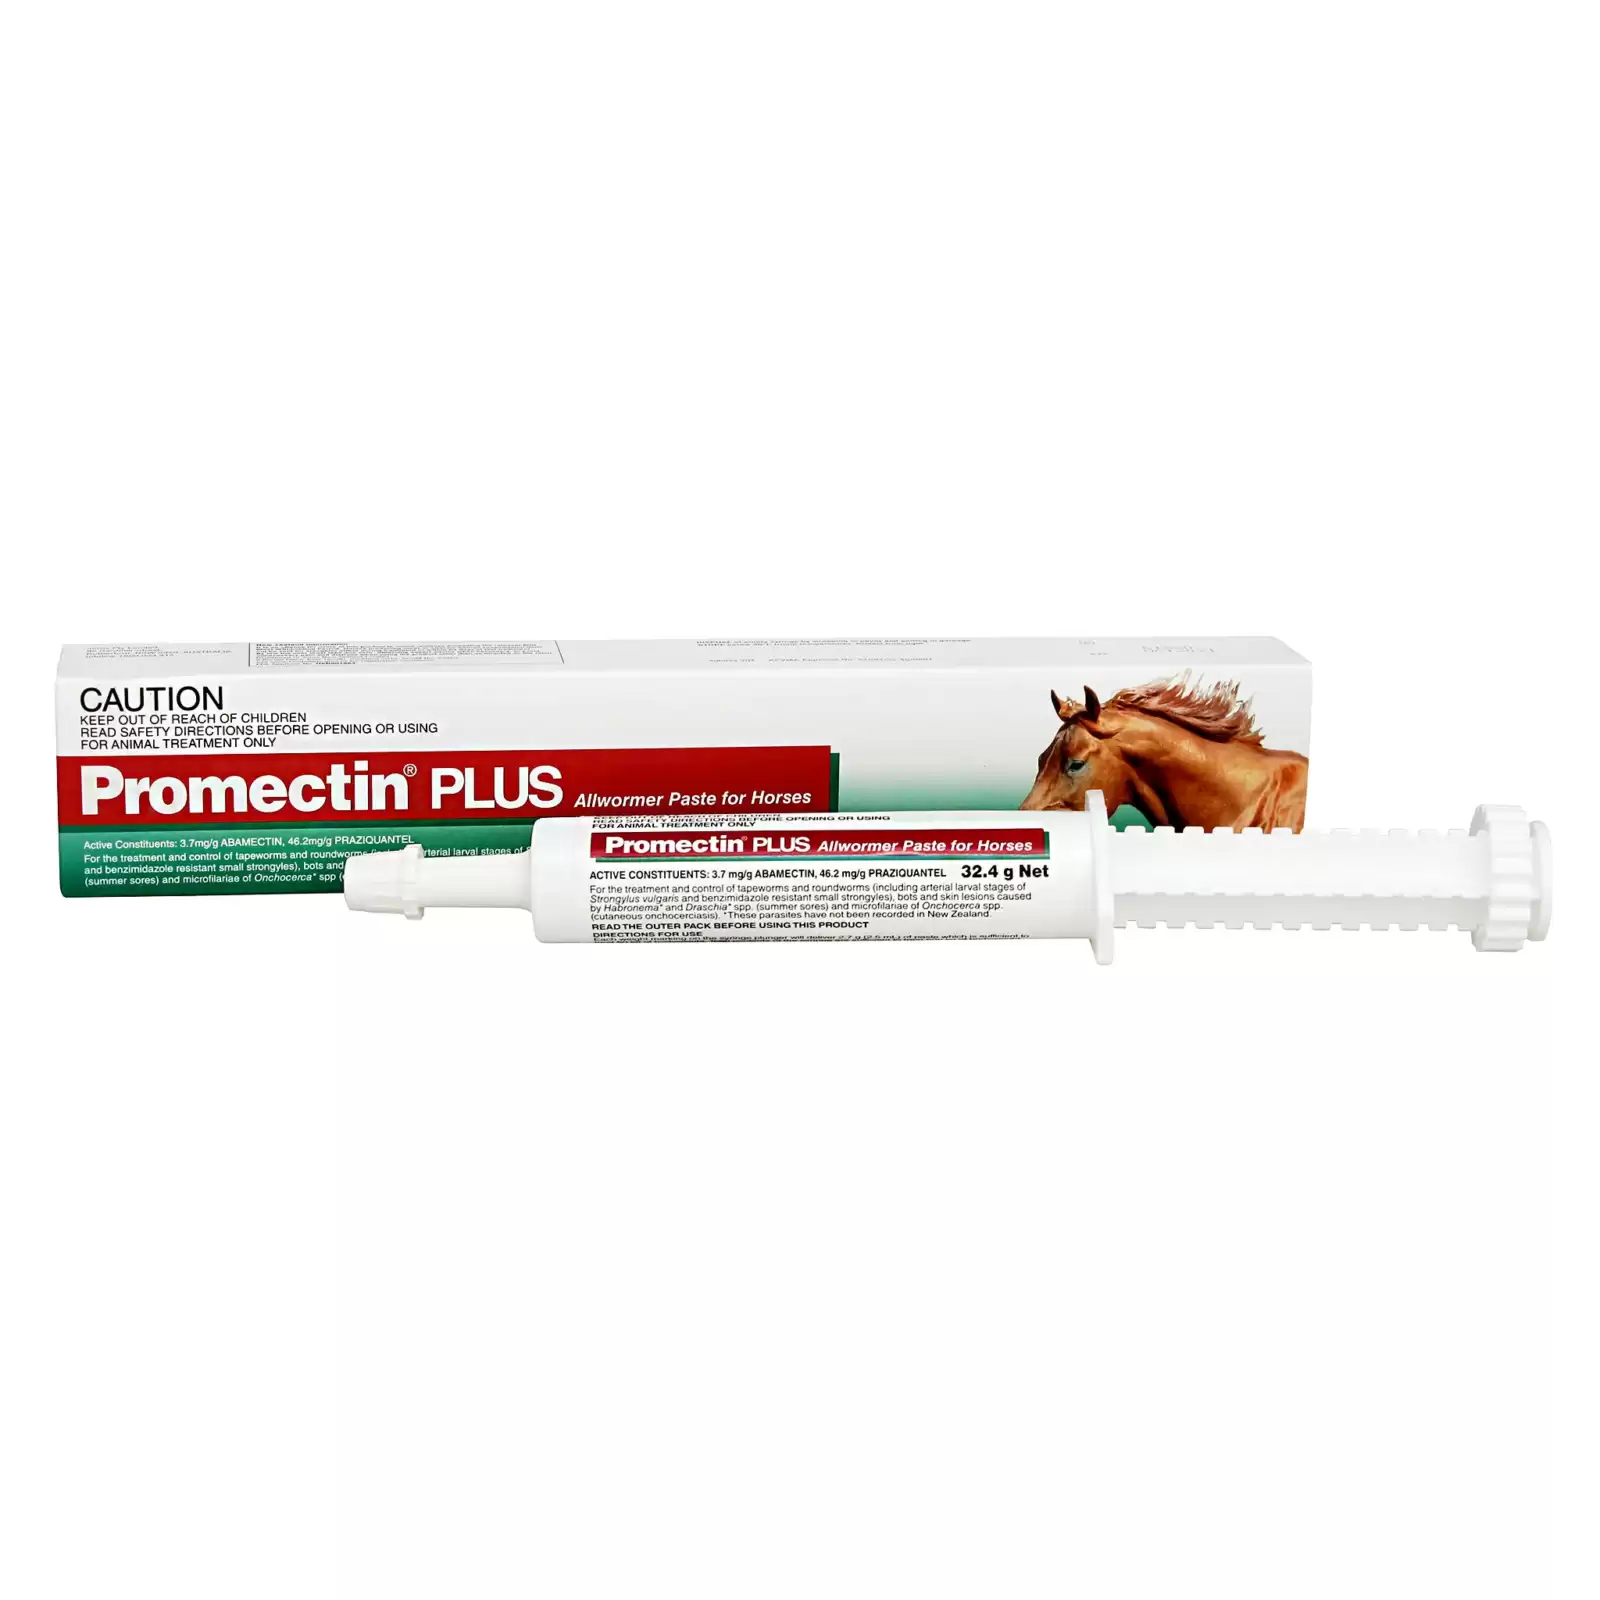 Promectin Plus Worming Paste For Horses